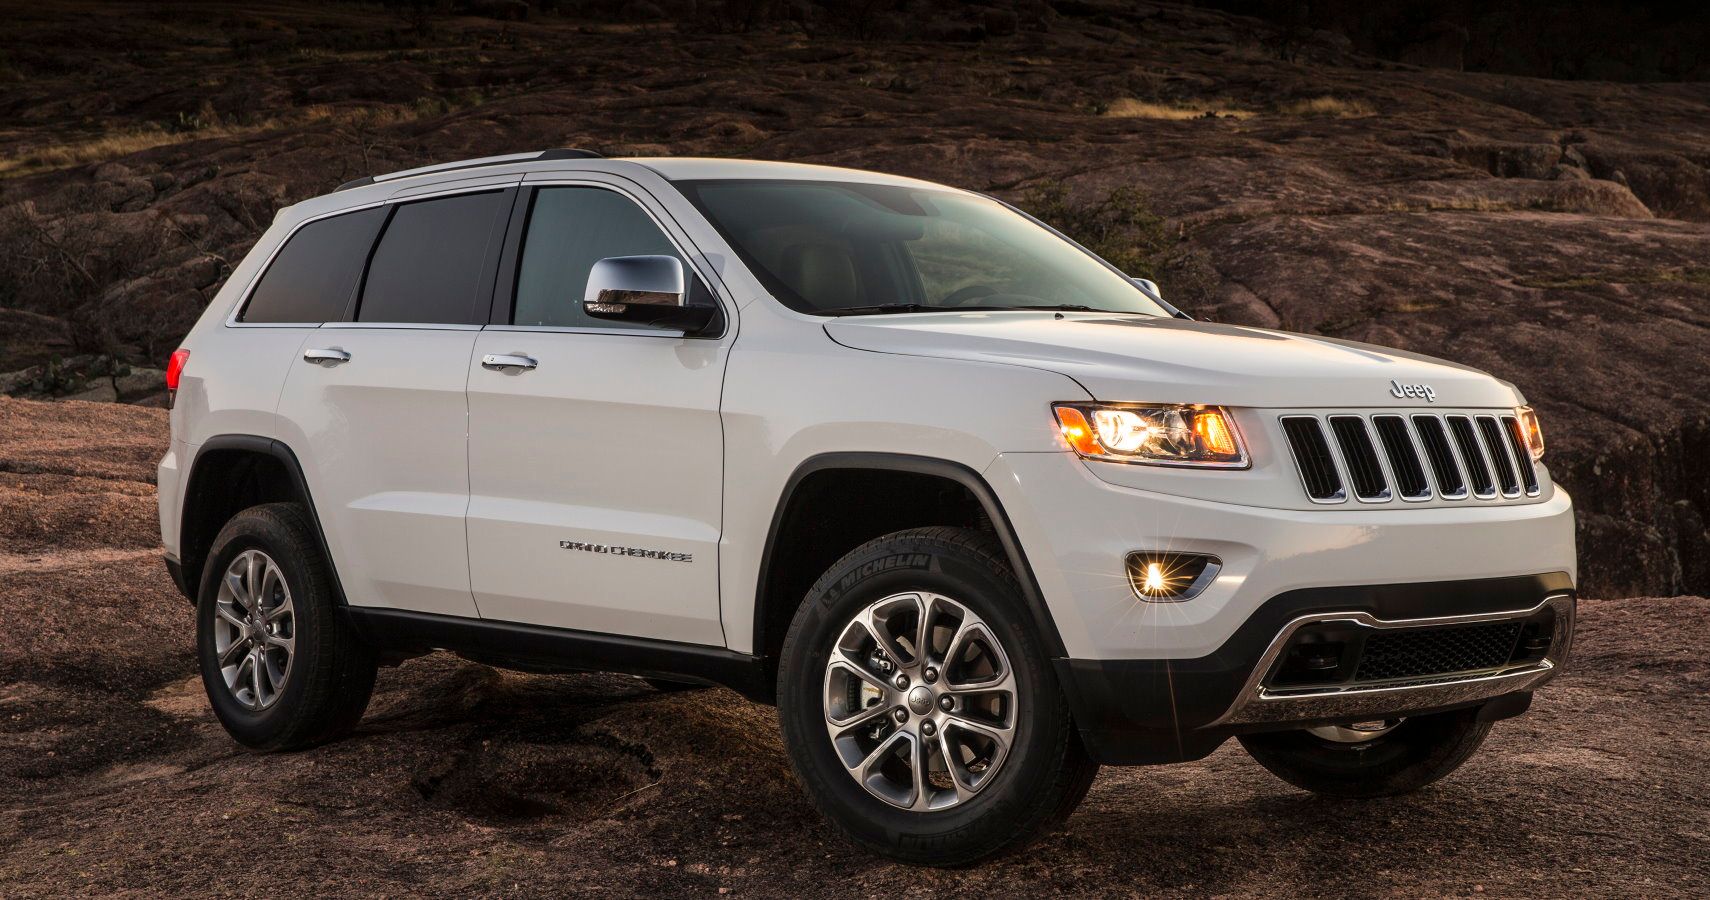 700,000 Dodge Durangos And Jeep Grand Cherokees Recalled For Possible Engine Stall Issue